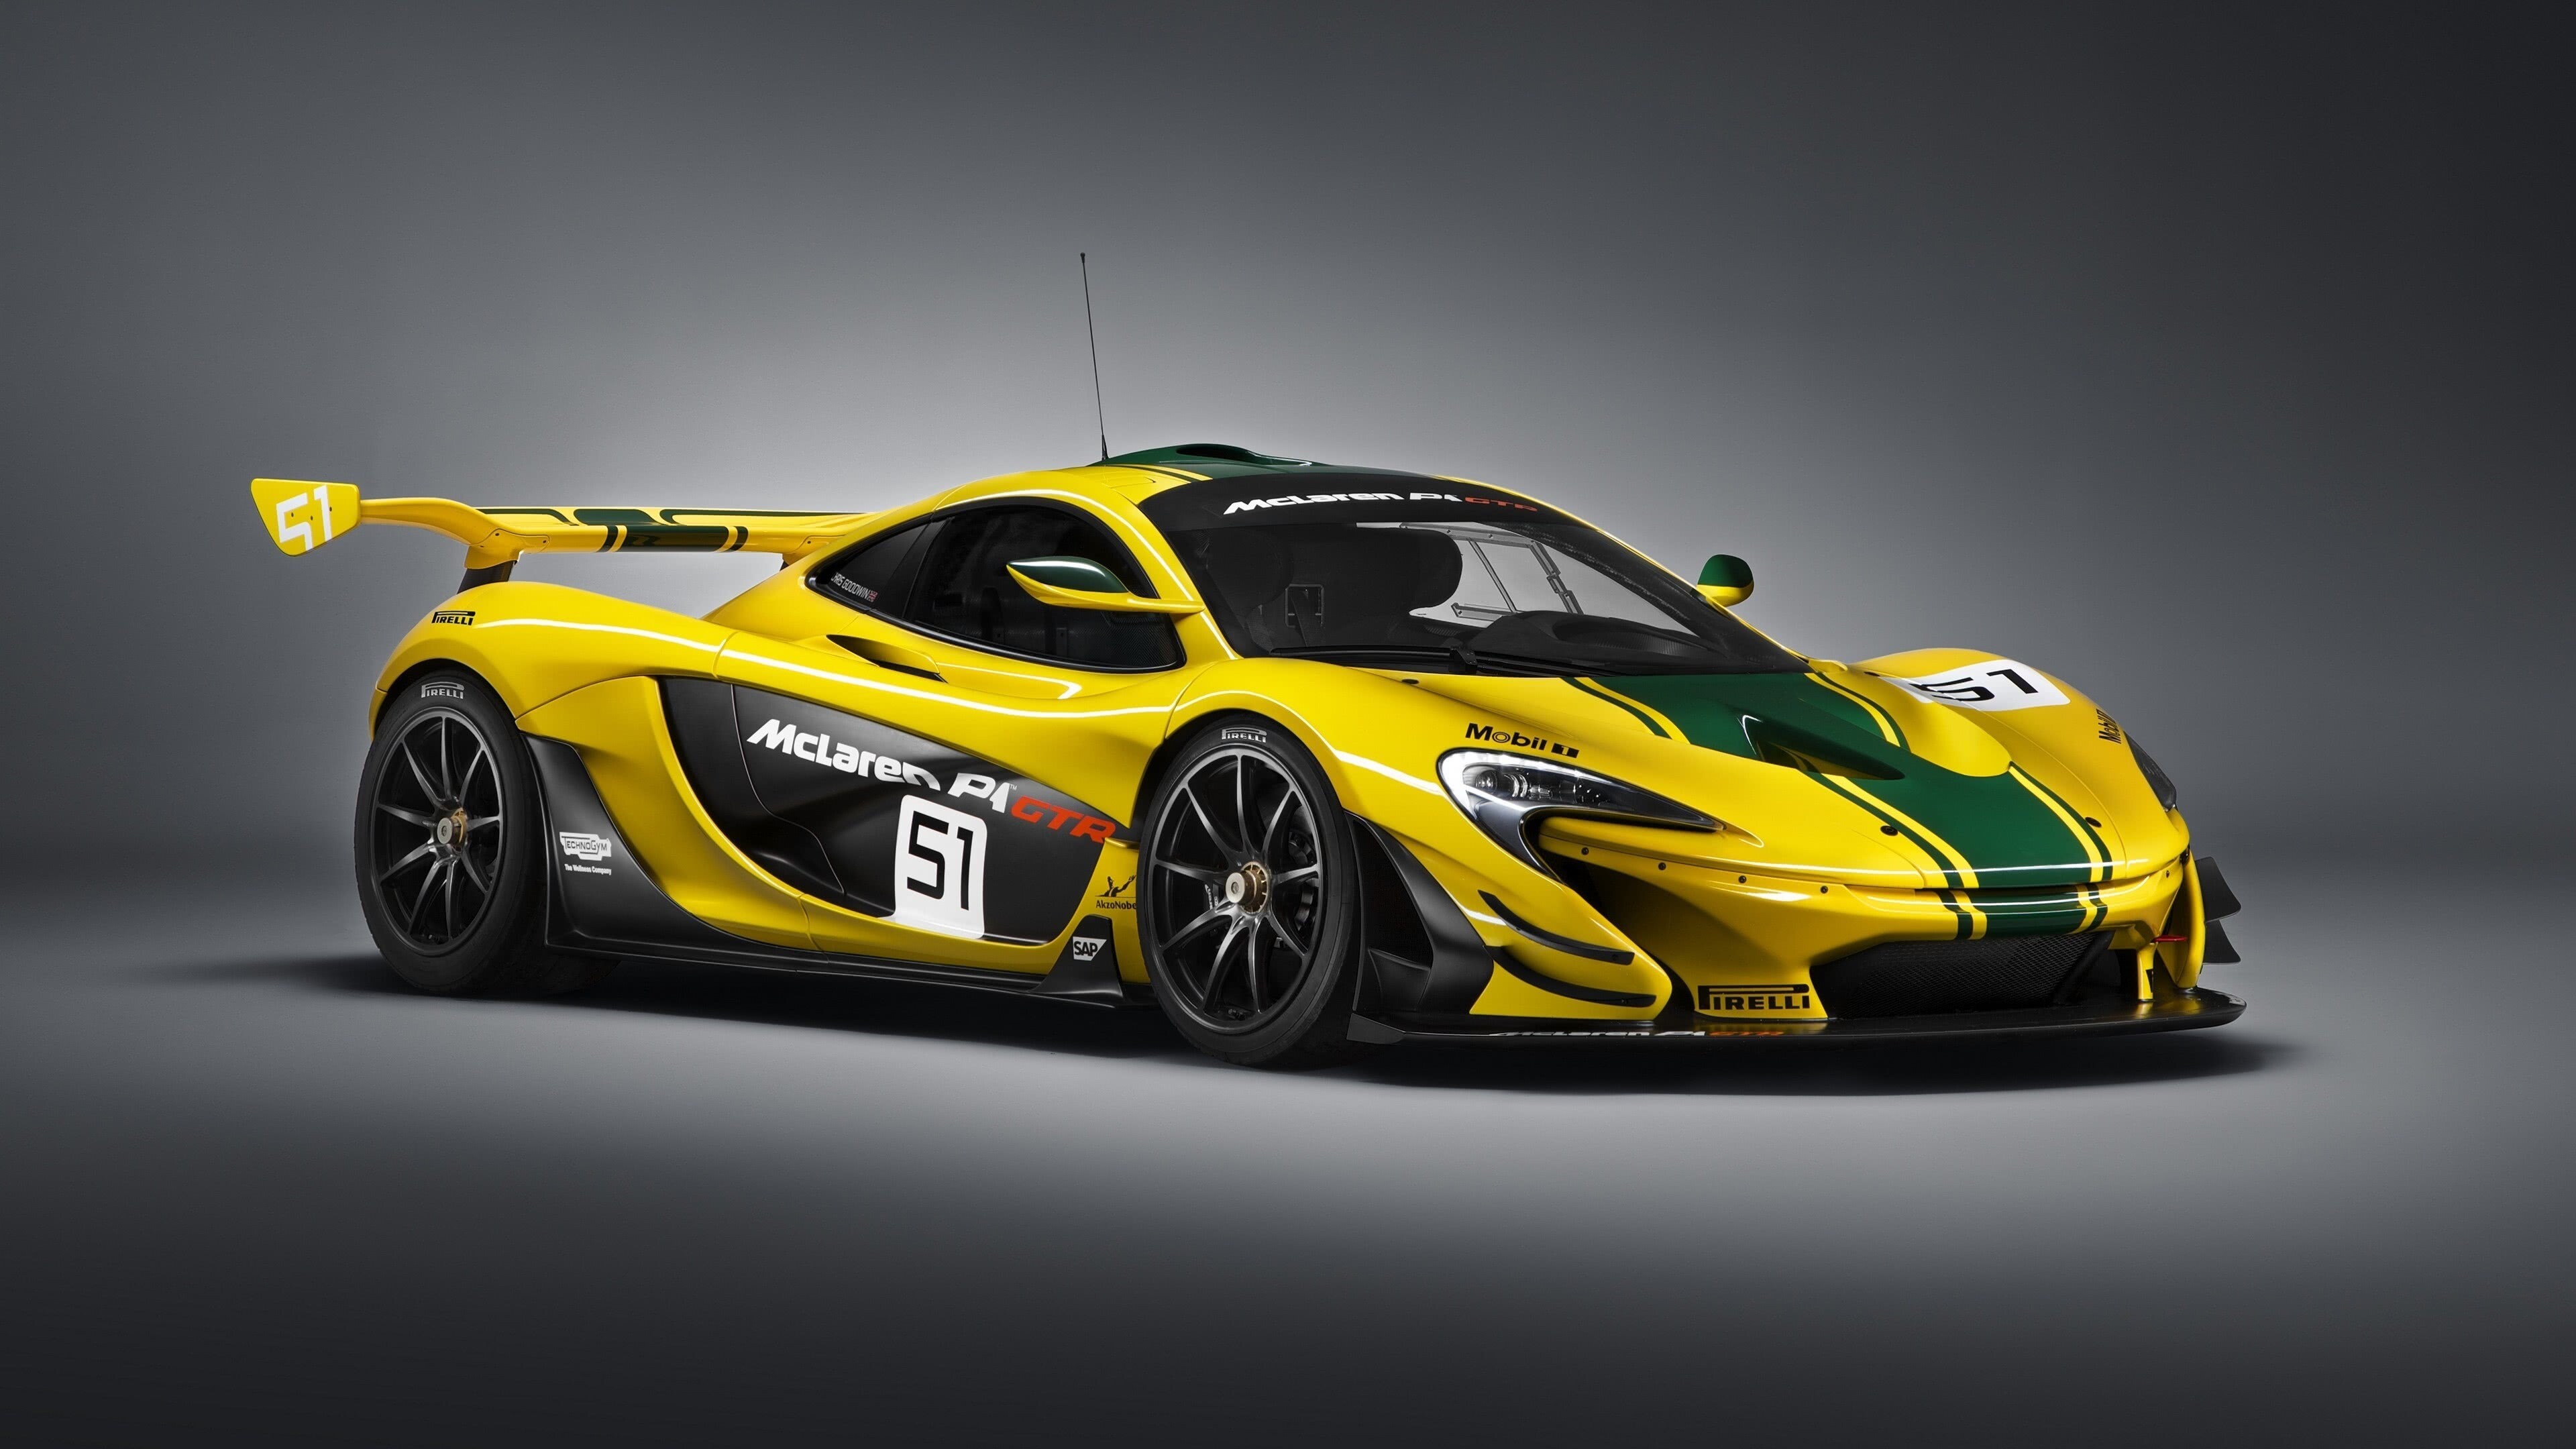 McLaren: P1 GTR, A limited-production mid-engine plug-in hybrid sports car. 3840x2160 4K Background.